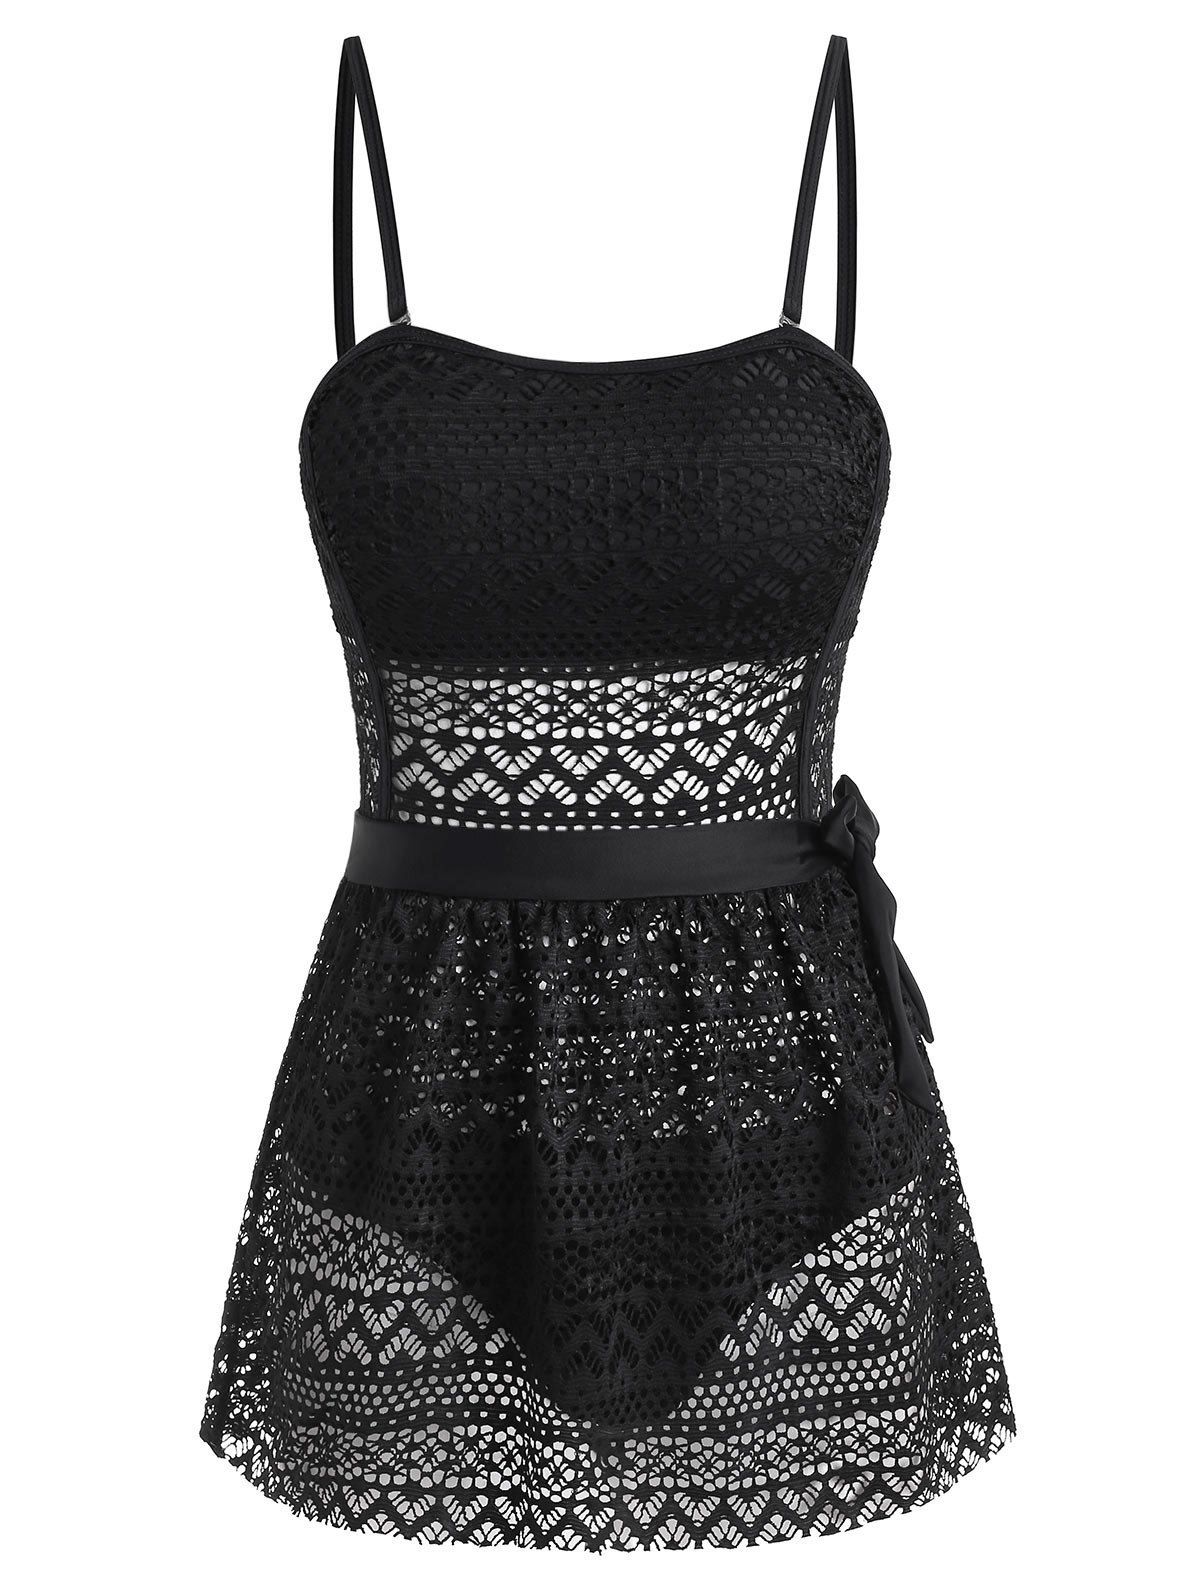 Openwork One-piece Swimsuit with Sarong - BLACK XL